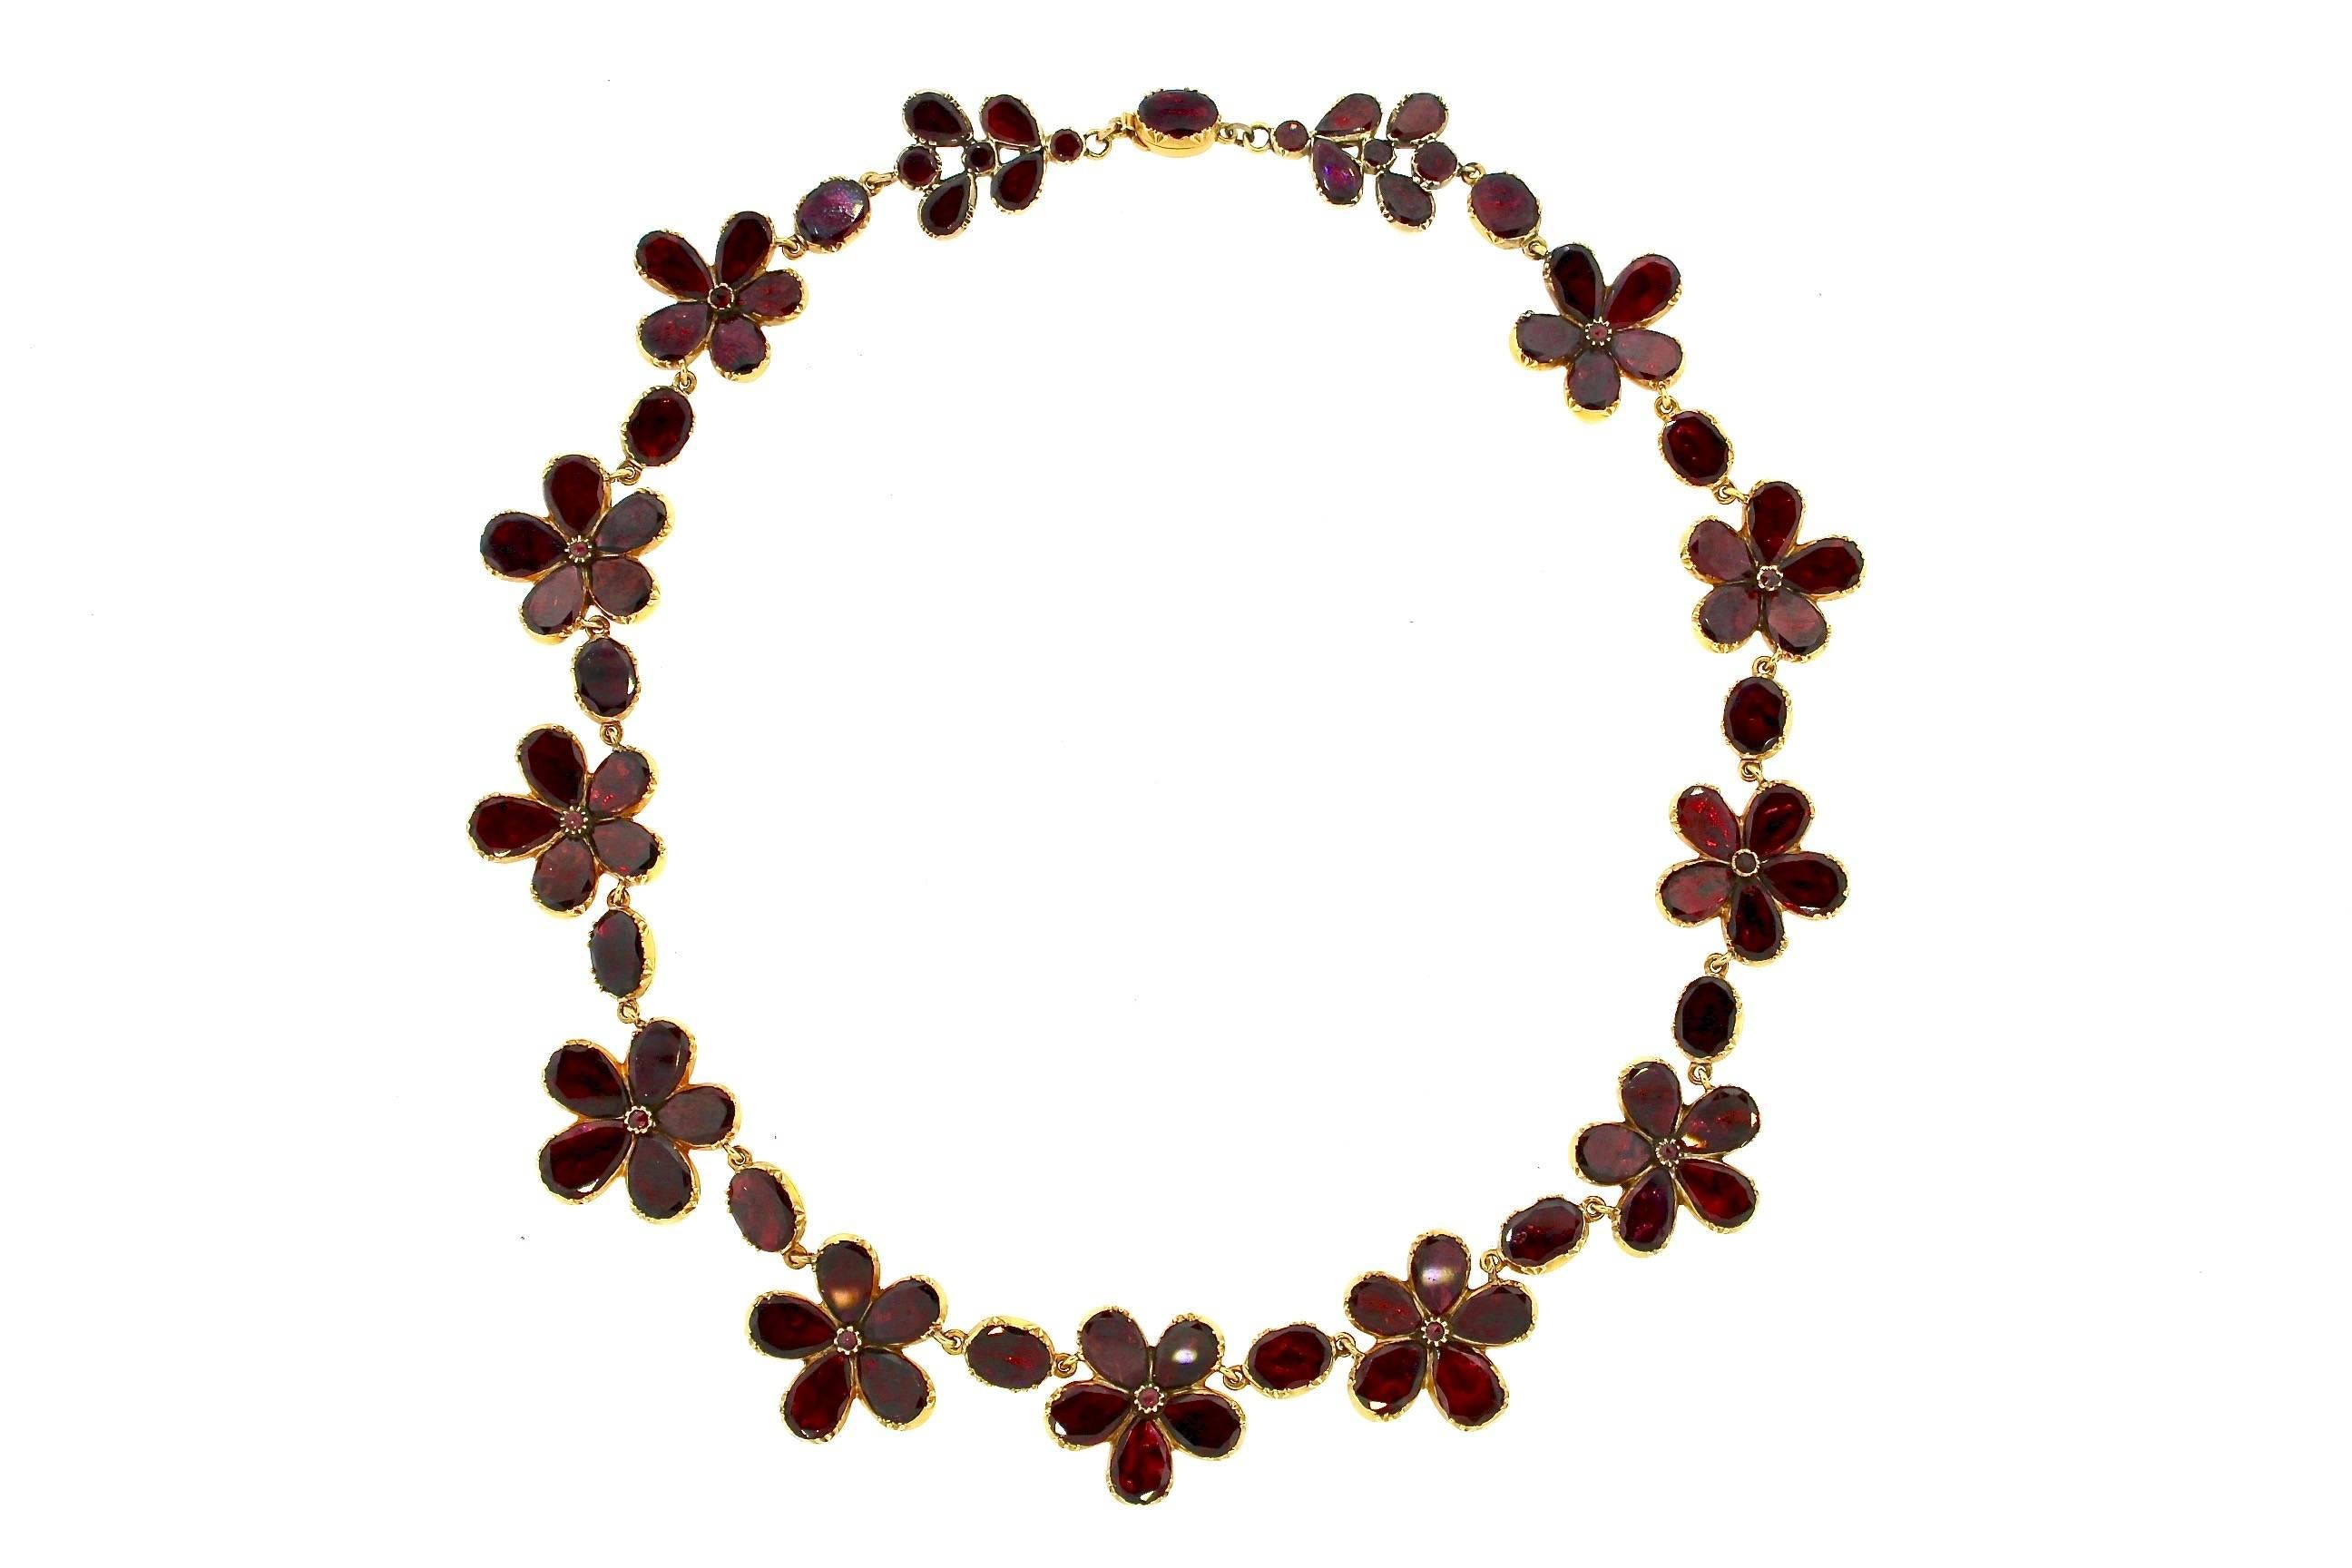 A feminine and lively necklace, that although is over 200 years old is a current and youthful necklace for today. Foiled back red garnets create five pointed flowers with oval garnets set in between. This Georgian necklace is made in 18k gold, there